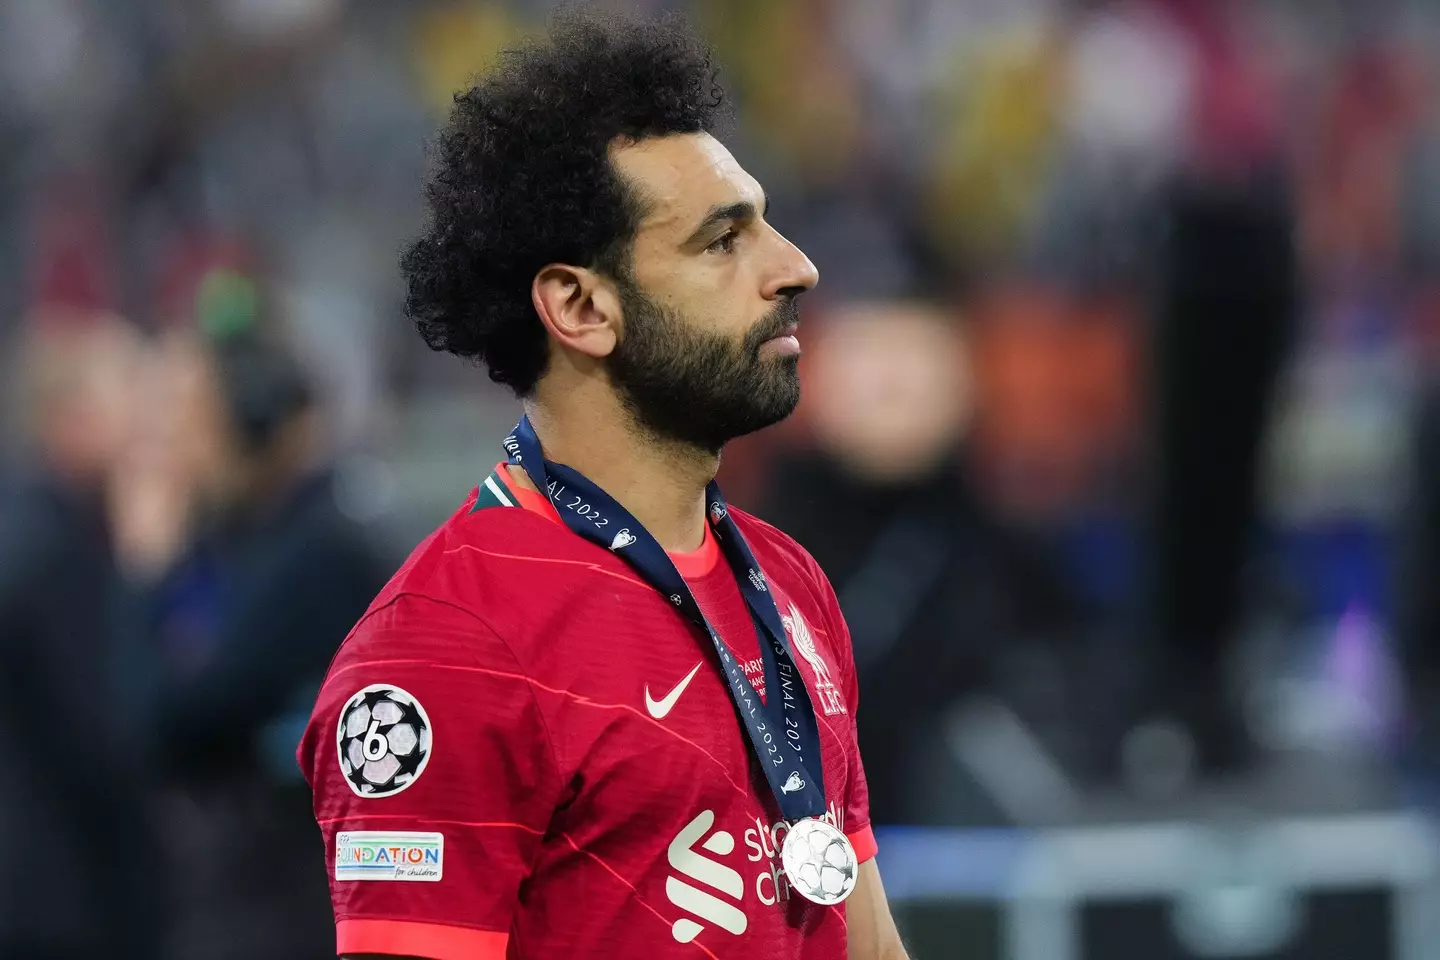 Salah was left dejected at full time. Image: Alamy